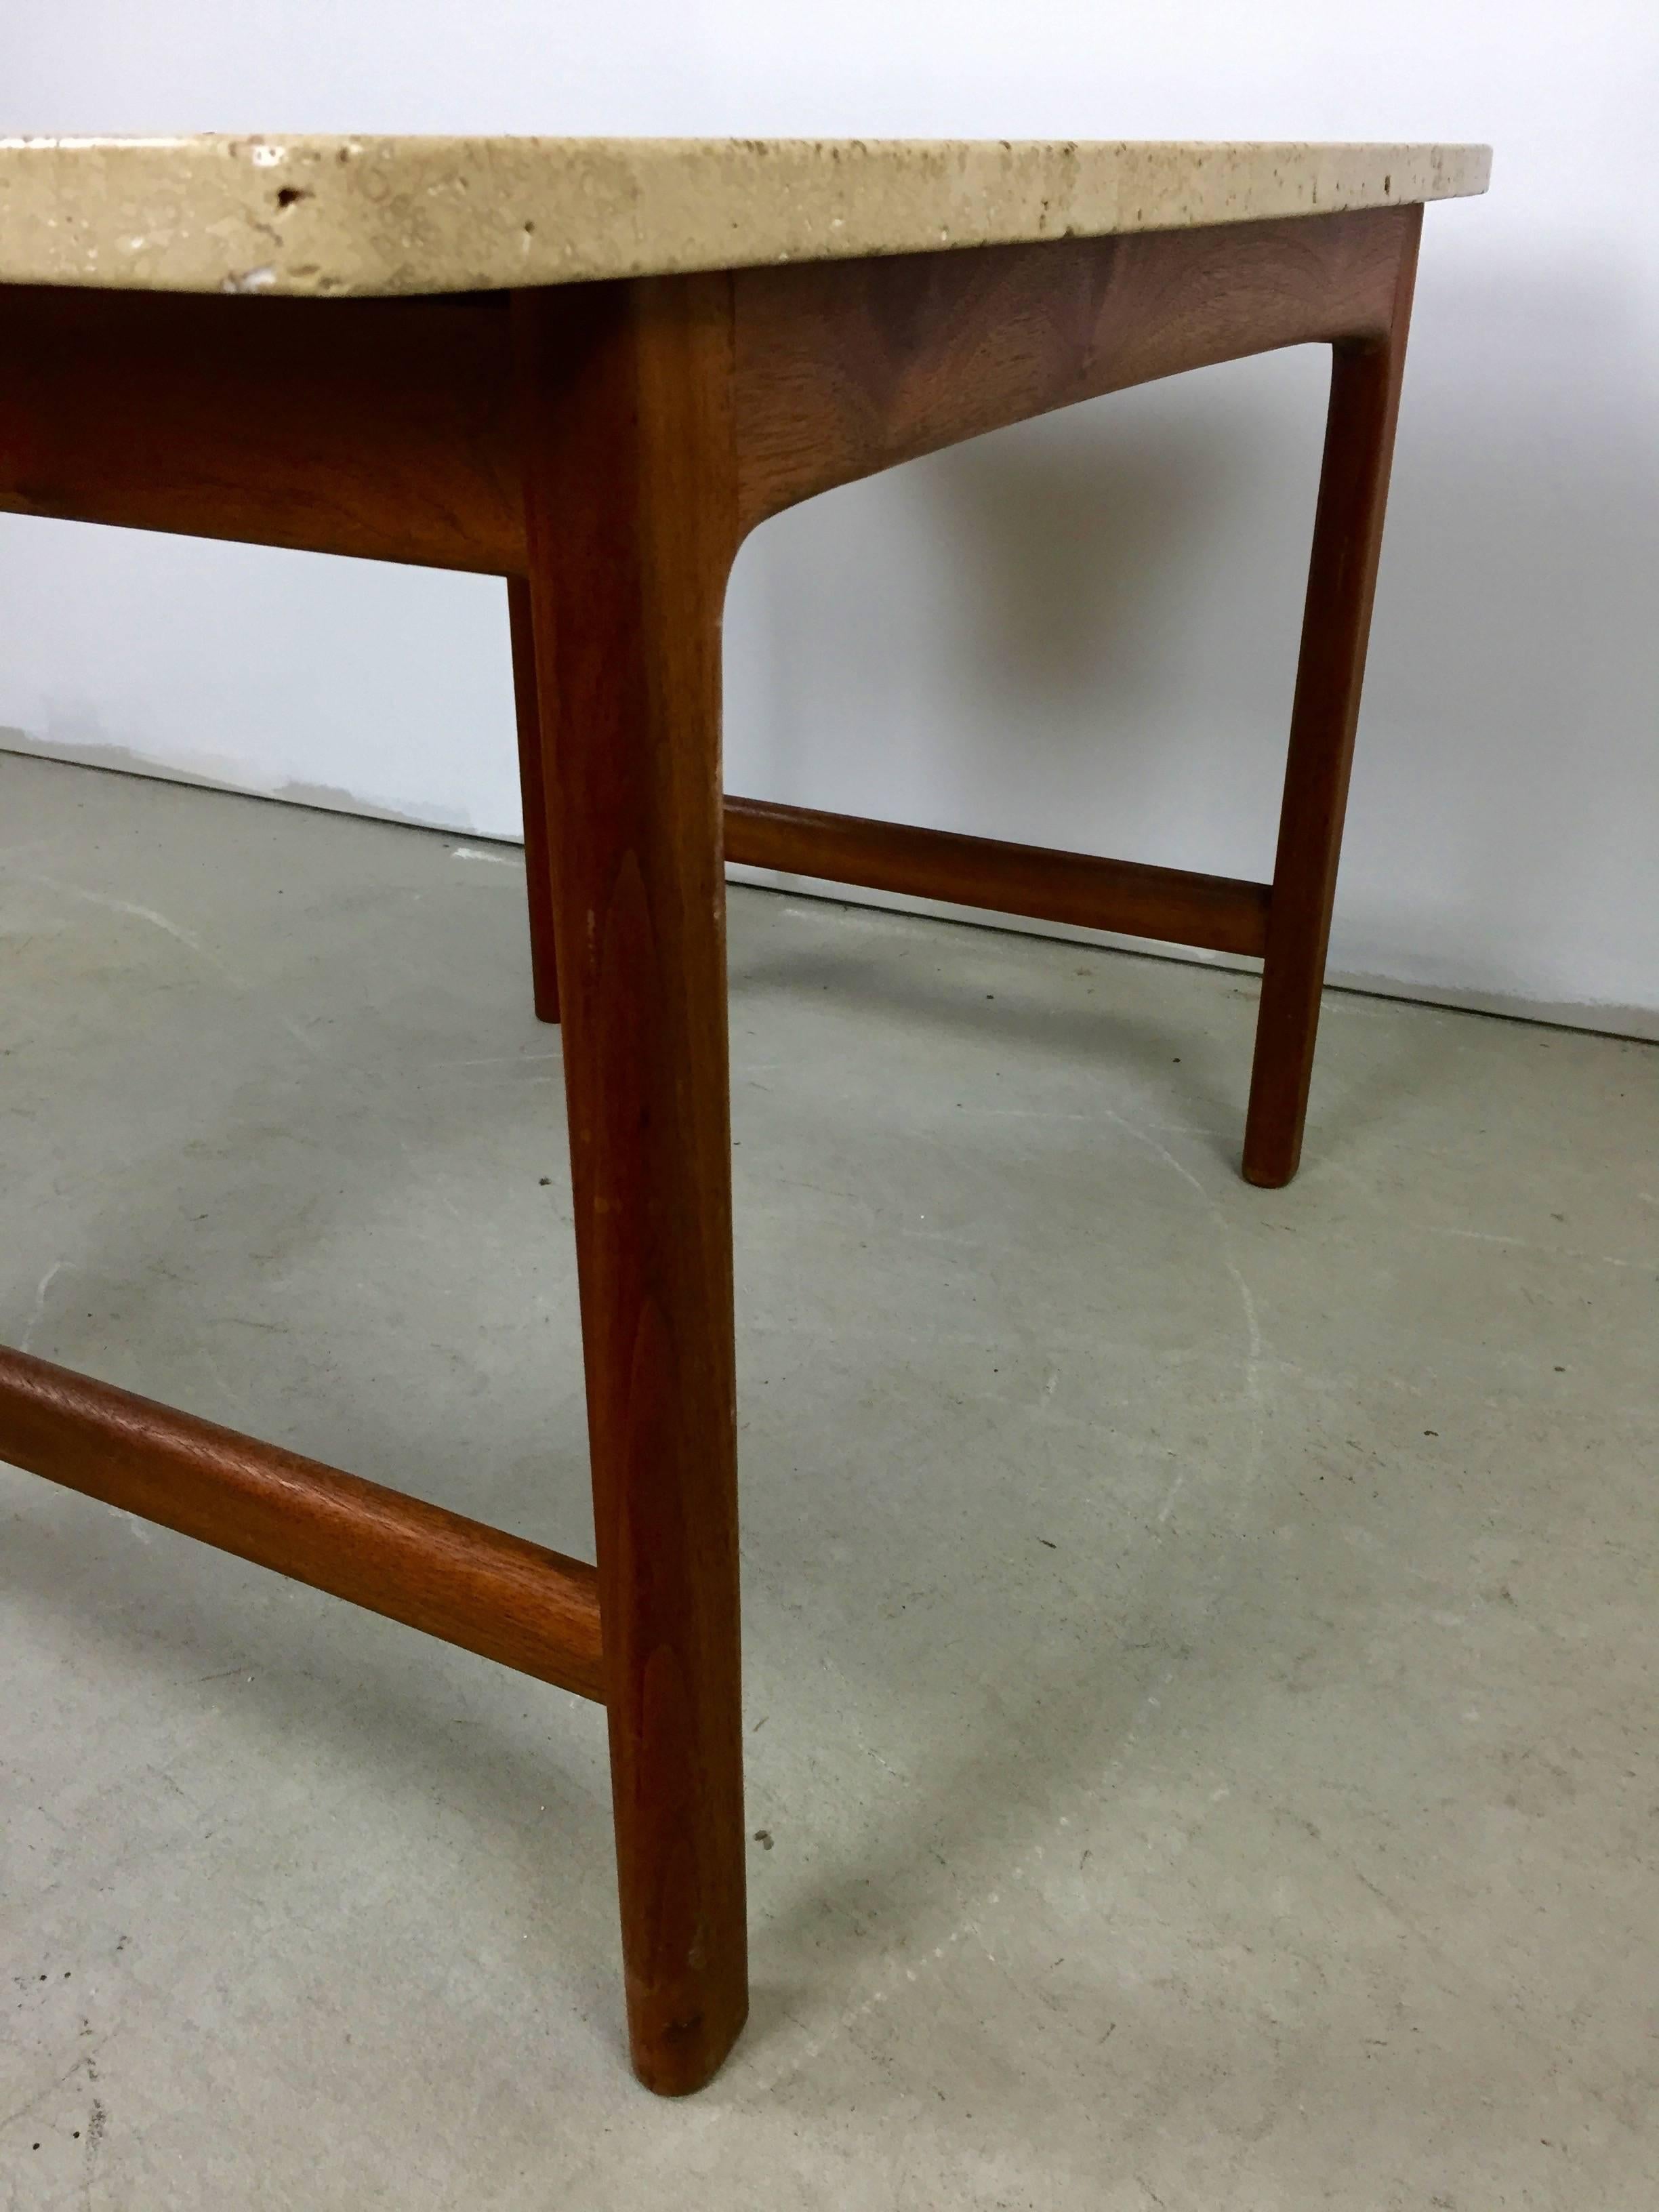 DUX Teak and Travertine Marble Lamp Table by Folke Ohlsson In Excellent Condition For Sale In Asbury Park, NJ